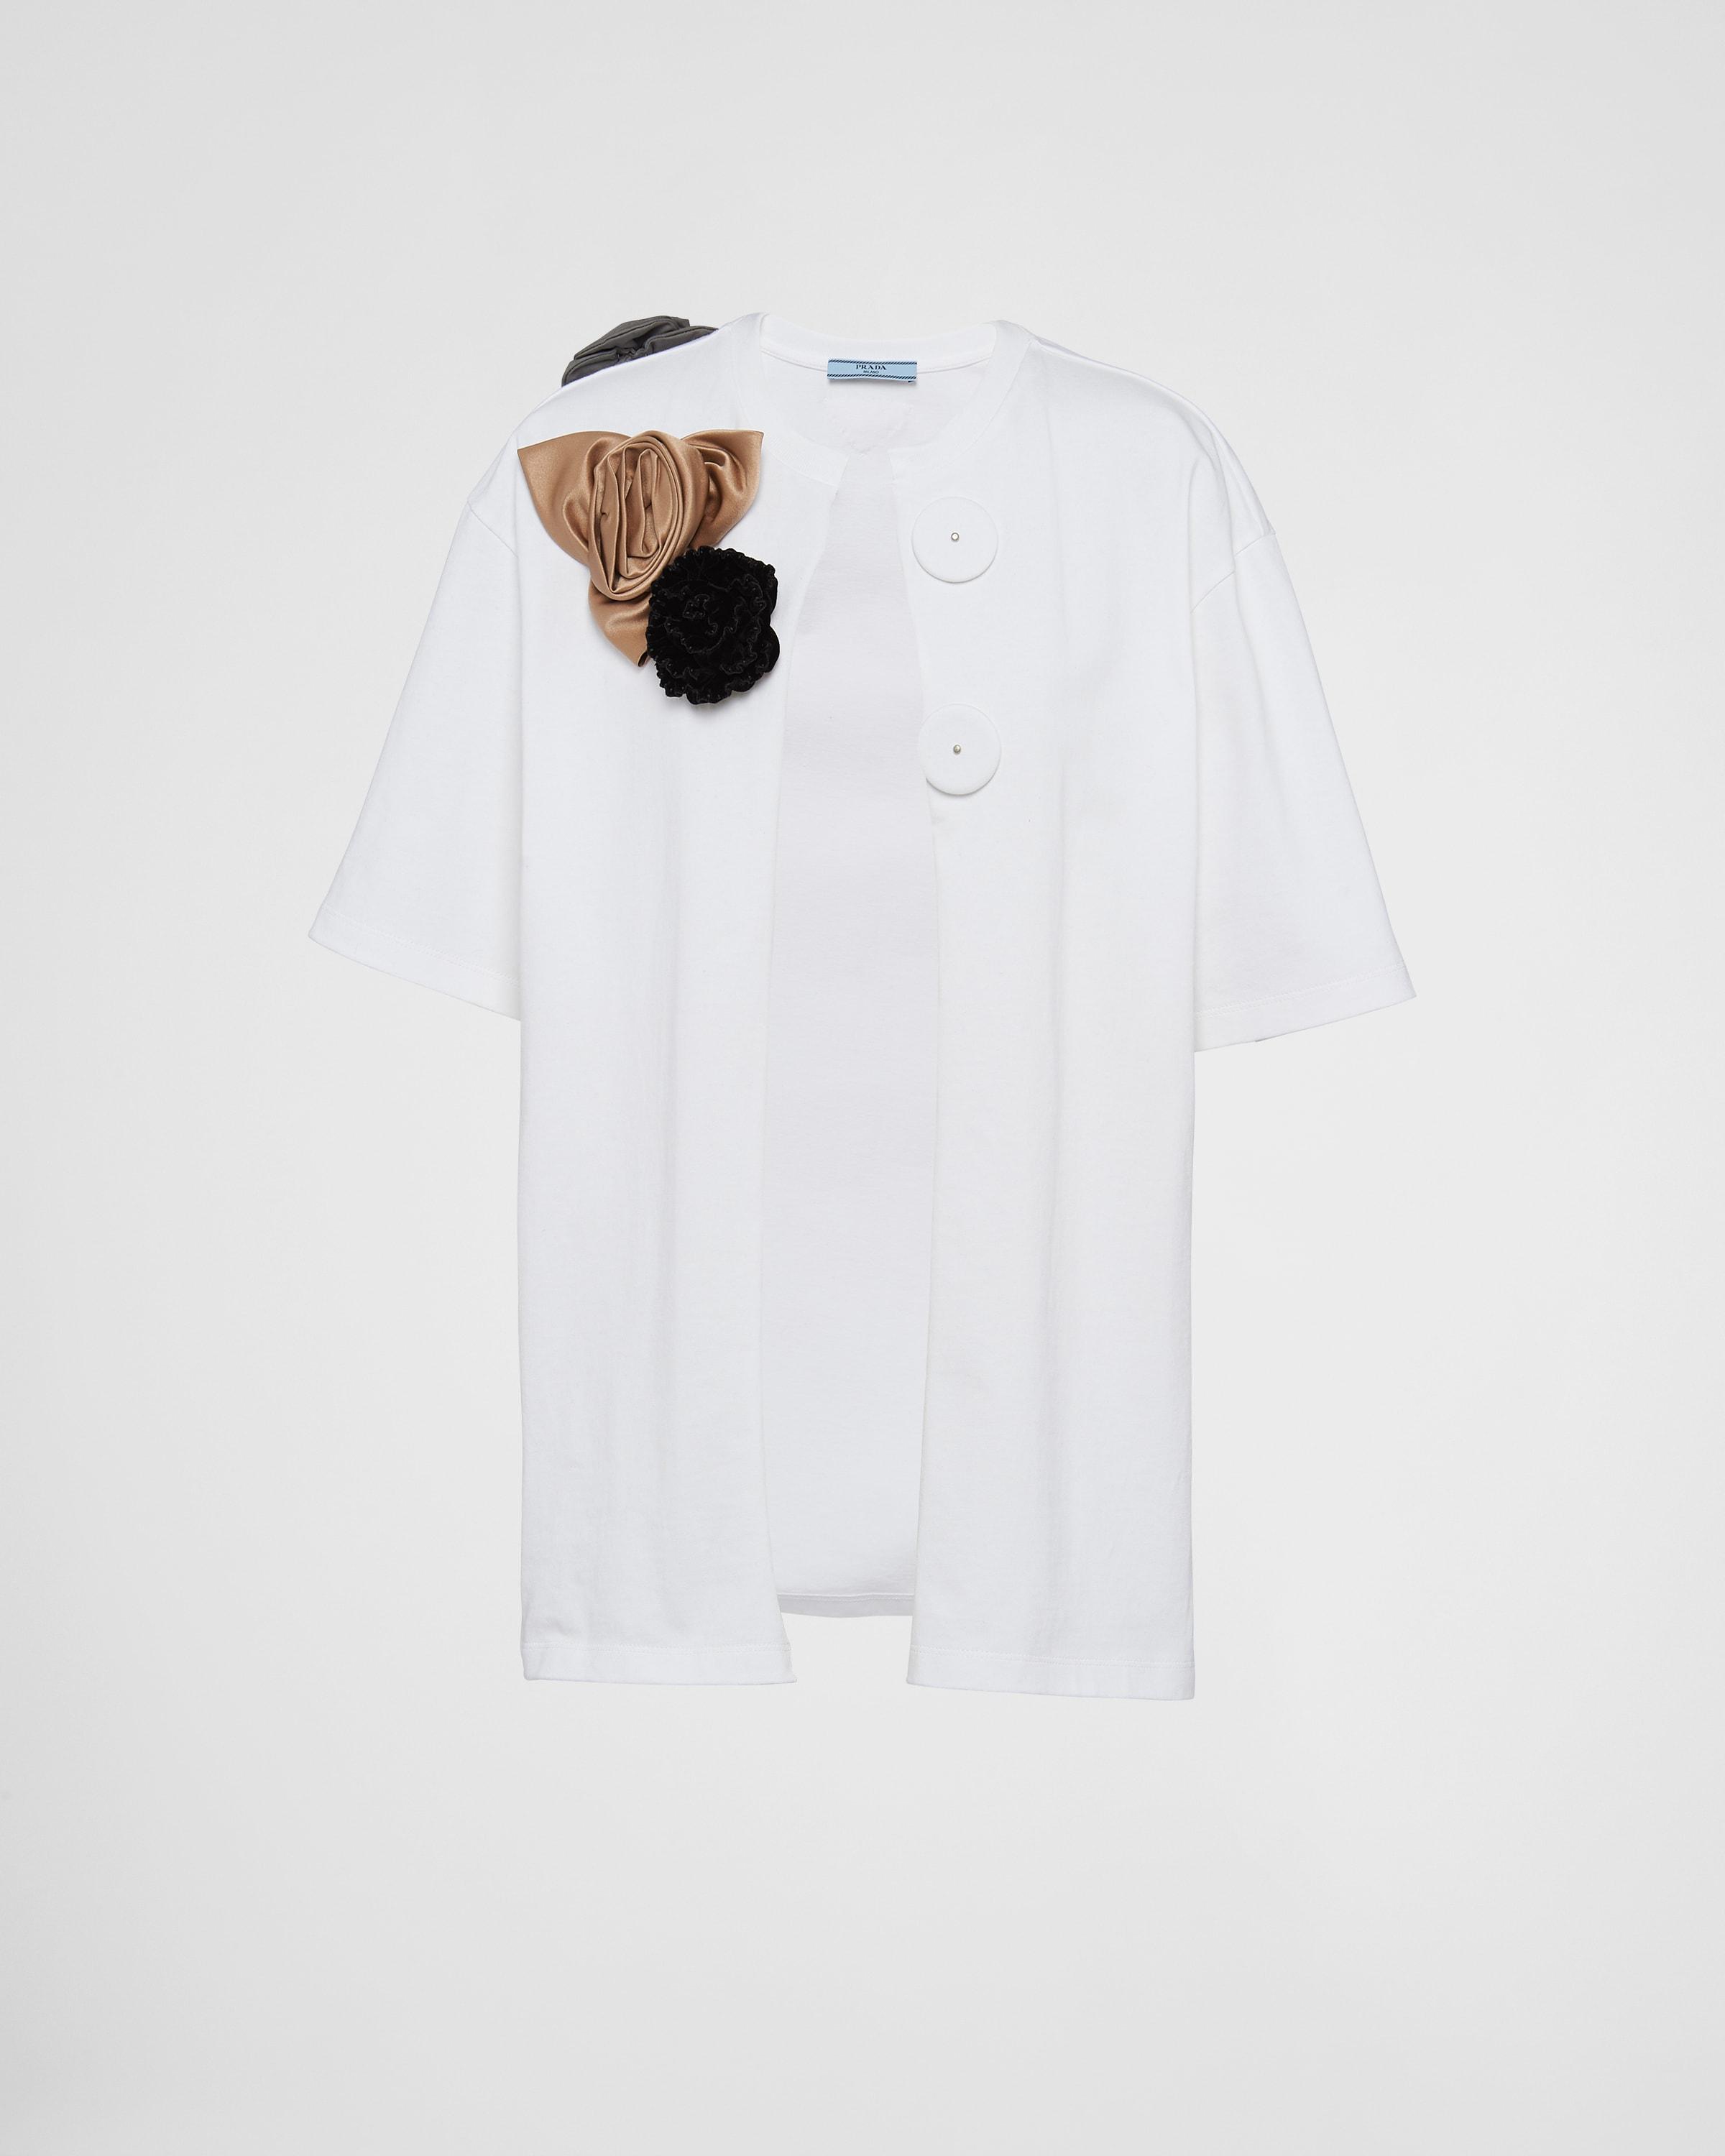 Prada Jersey Top With Appliqués in White | Lyst